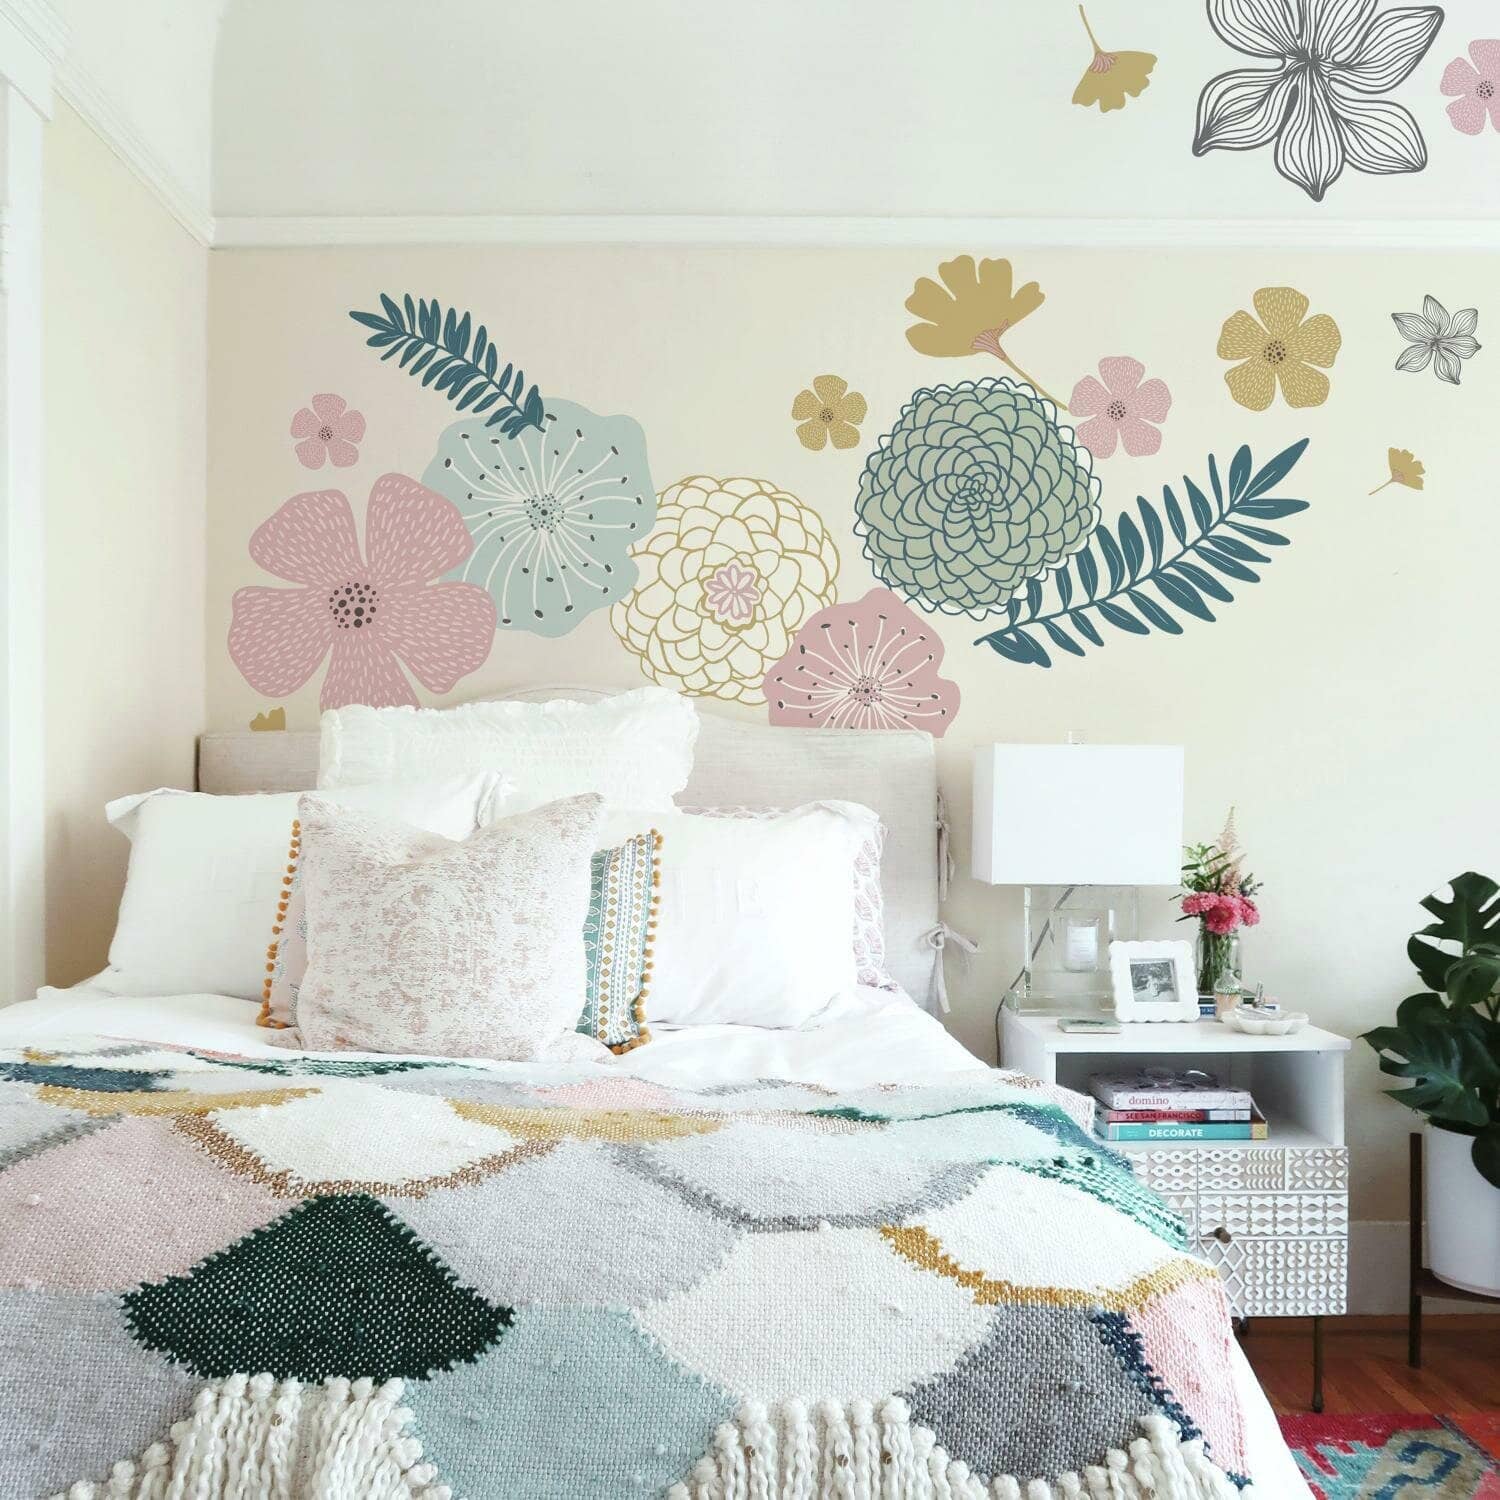 Try Large Wall Decals